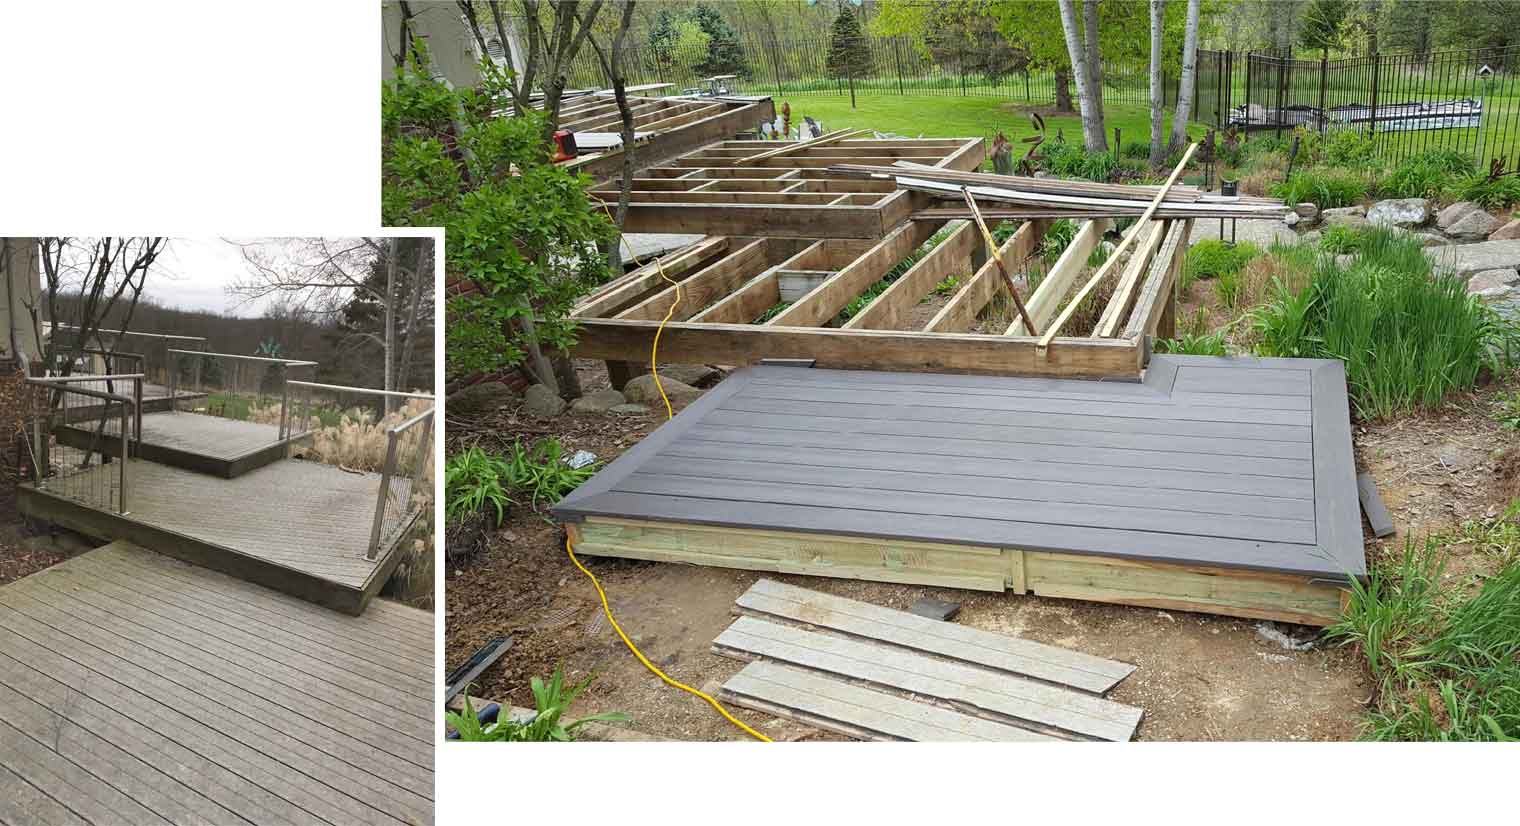 before and in progress photos of new composite decking material being installed on a rural Iowa deck designed and built by Silent Rivers of Des Moines